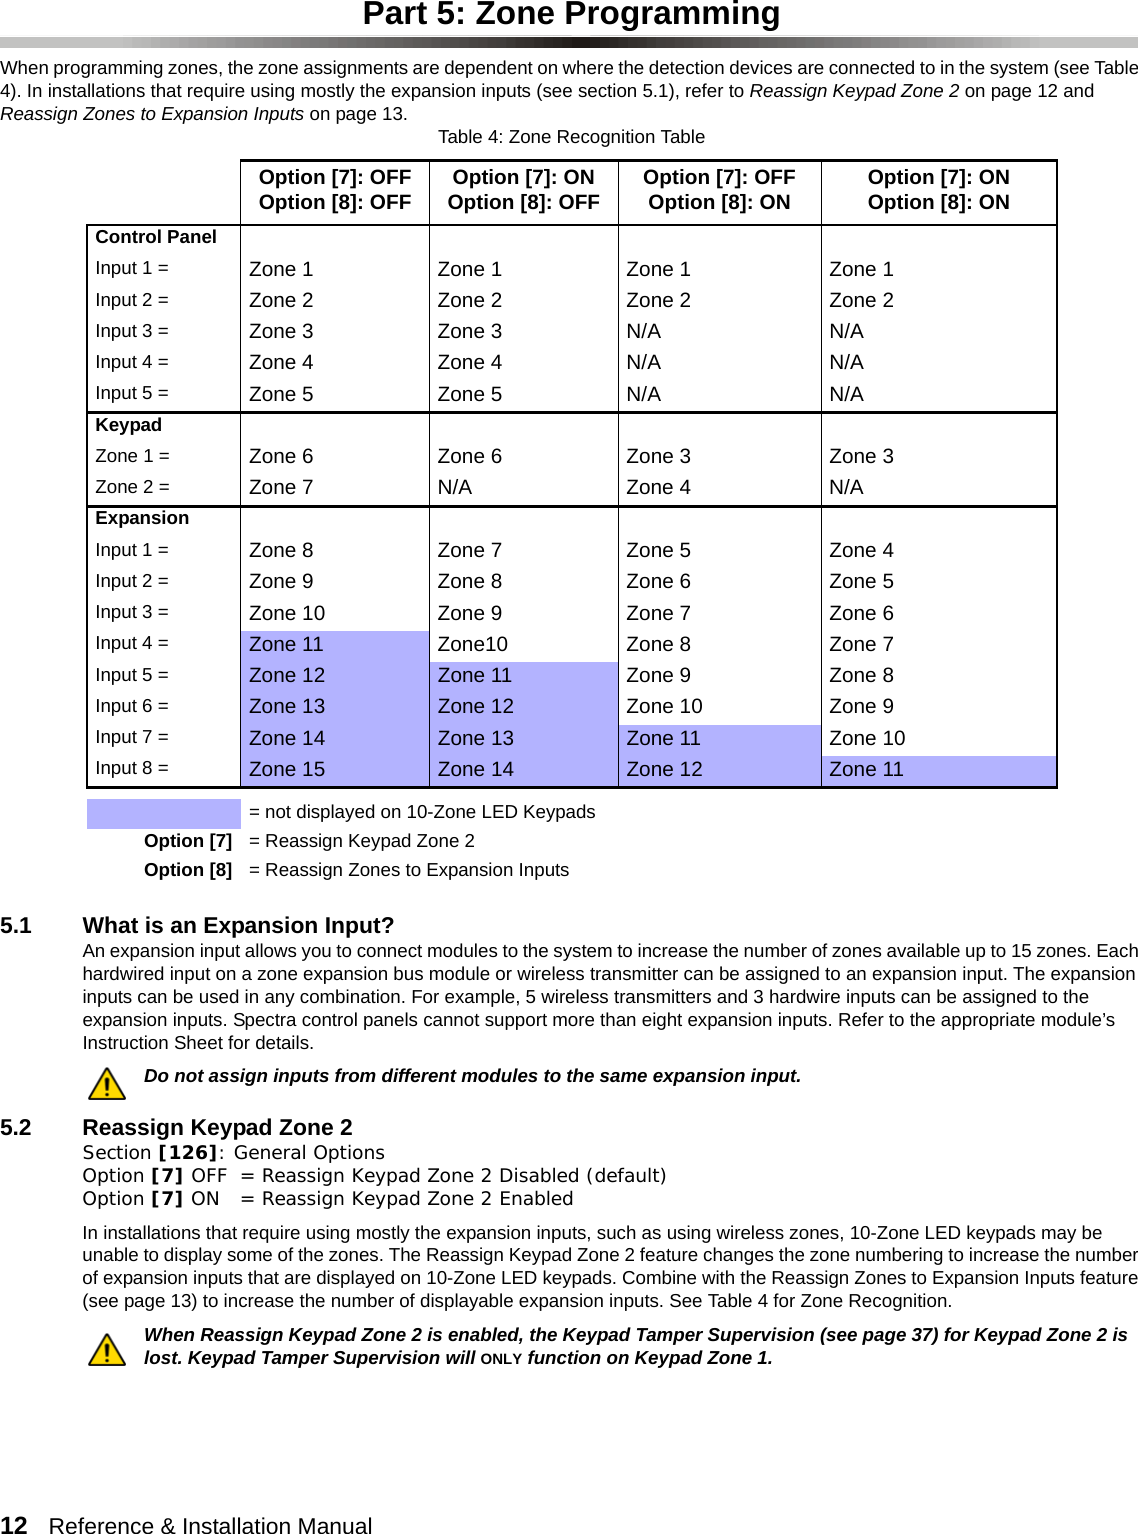 12   Reference &amp; Installation Manual   Part 5: Zone ProgrammingWhen programming zones, the zone assignments are dependent on where the detection devices are connected to in the system (see Table 4). In installations that require using mostly the expansion inputs (see section 5.1), refer to Reassign Keypad Zone 2 on page 12 and Reassign Zones to Expansion Inputs on page 13. Table 4: Zone Recognition Table  5.1 What is an Expansion Input?An expansion input allows you to connect modules to the system to increase the number of zones available up to 15 zones. Each hardwired input on a zone expansion bus module or wireless transmitter can be assigned to an expansion input. The expansion inputs can be used in any combination. For example, 5 wireless transmitters and 3 hardwire inputs can be assigned to the expansion inputs. Spectra control panels cannot support more than eight expansion inputs. Refer to the appropriate module’s Instruction Sheet for details.Do not assign inputs from different modules to the same expansion input. 5.2 Reassign Keypad Zone 2Section [126]: General OptionsOption [7] OFF = Reassign Keypad Zone 2 Disabled (default)Option [7] ON = Reassign Keypad Zone 2 EnabledIn installations that require using mostly the expansion inputs, such as using wireless zones, 10-Zone LED keypads may be unable to display some of the zones. The Reassign Keypad Zone 2 feature changes the zone numbering to increase the number of expansion inputs that are displayed on 10-Zone LED keypads. Combine with the Reassign Zones to Expansion Inputs feature (see page 13) to increase the number of displayable expansion inputs. See Table 4 for Zone Recognition.When Reassign Keypad Zone 2 is enabled, the Keypad Tamper Supervision (see page 37) for Keypad Zone 2 is lost. Keypad Tamper Supervision will ONLY function on Keypad Zone 1.Option [7]: OFFOption [8]: OFF Option [7]: ONOption [8]: OFF Option [7]: OFFOption [8]: ON Option [7]: ONOption [8]: ONControl PanelInput 1 = Zone 1 Zone 1 Zone 1 Zone 1Input 2 = Zone 2 Zone 2 Zone 2 Zone 2Input 3 = Zone 3Zone 3N/A N/AInput 4 = Zone 4Zone 4N/A N/AInput 5 = Zone 5Zone 5N/A N/AKeypadZone 1 =  Zone 6 Zone 6 Zone 3 Zone 3Zone 2 =  Zone 7 N/A Zone 4 N/AExpansionInput 1 =  Zone 8 Zone 7 Zone 5 Zone 4Input 2 =  Zone 9 Zone 8 Zone 6 Zone 5Input 3 =  Zone 10 Zone 9 Zone 7 Zone 6Input 4 =  Zone 11 Zone10 Zone 8 Zone 7Input 5 =  Zone 12 Zone 11 Zone 9 Zone 8Input 6 =  Zone 13 Zone 12 Zone 10 Zone 9Input 7 =  Zone 14 Zone 13 Zone 11 Zone 10Input 8 =  Zone 15 Zone 14 Zone 12 Zone 11= not displayed on 10-Zone LED KeypadsOption [7] = Reassign Keypad Zone 2Option [8] = Reassign Zones to Expansion Inputs